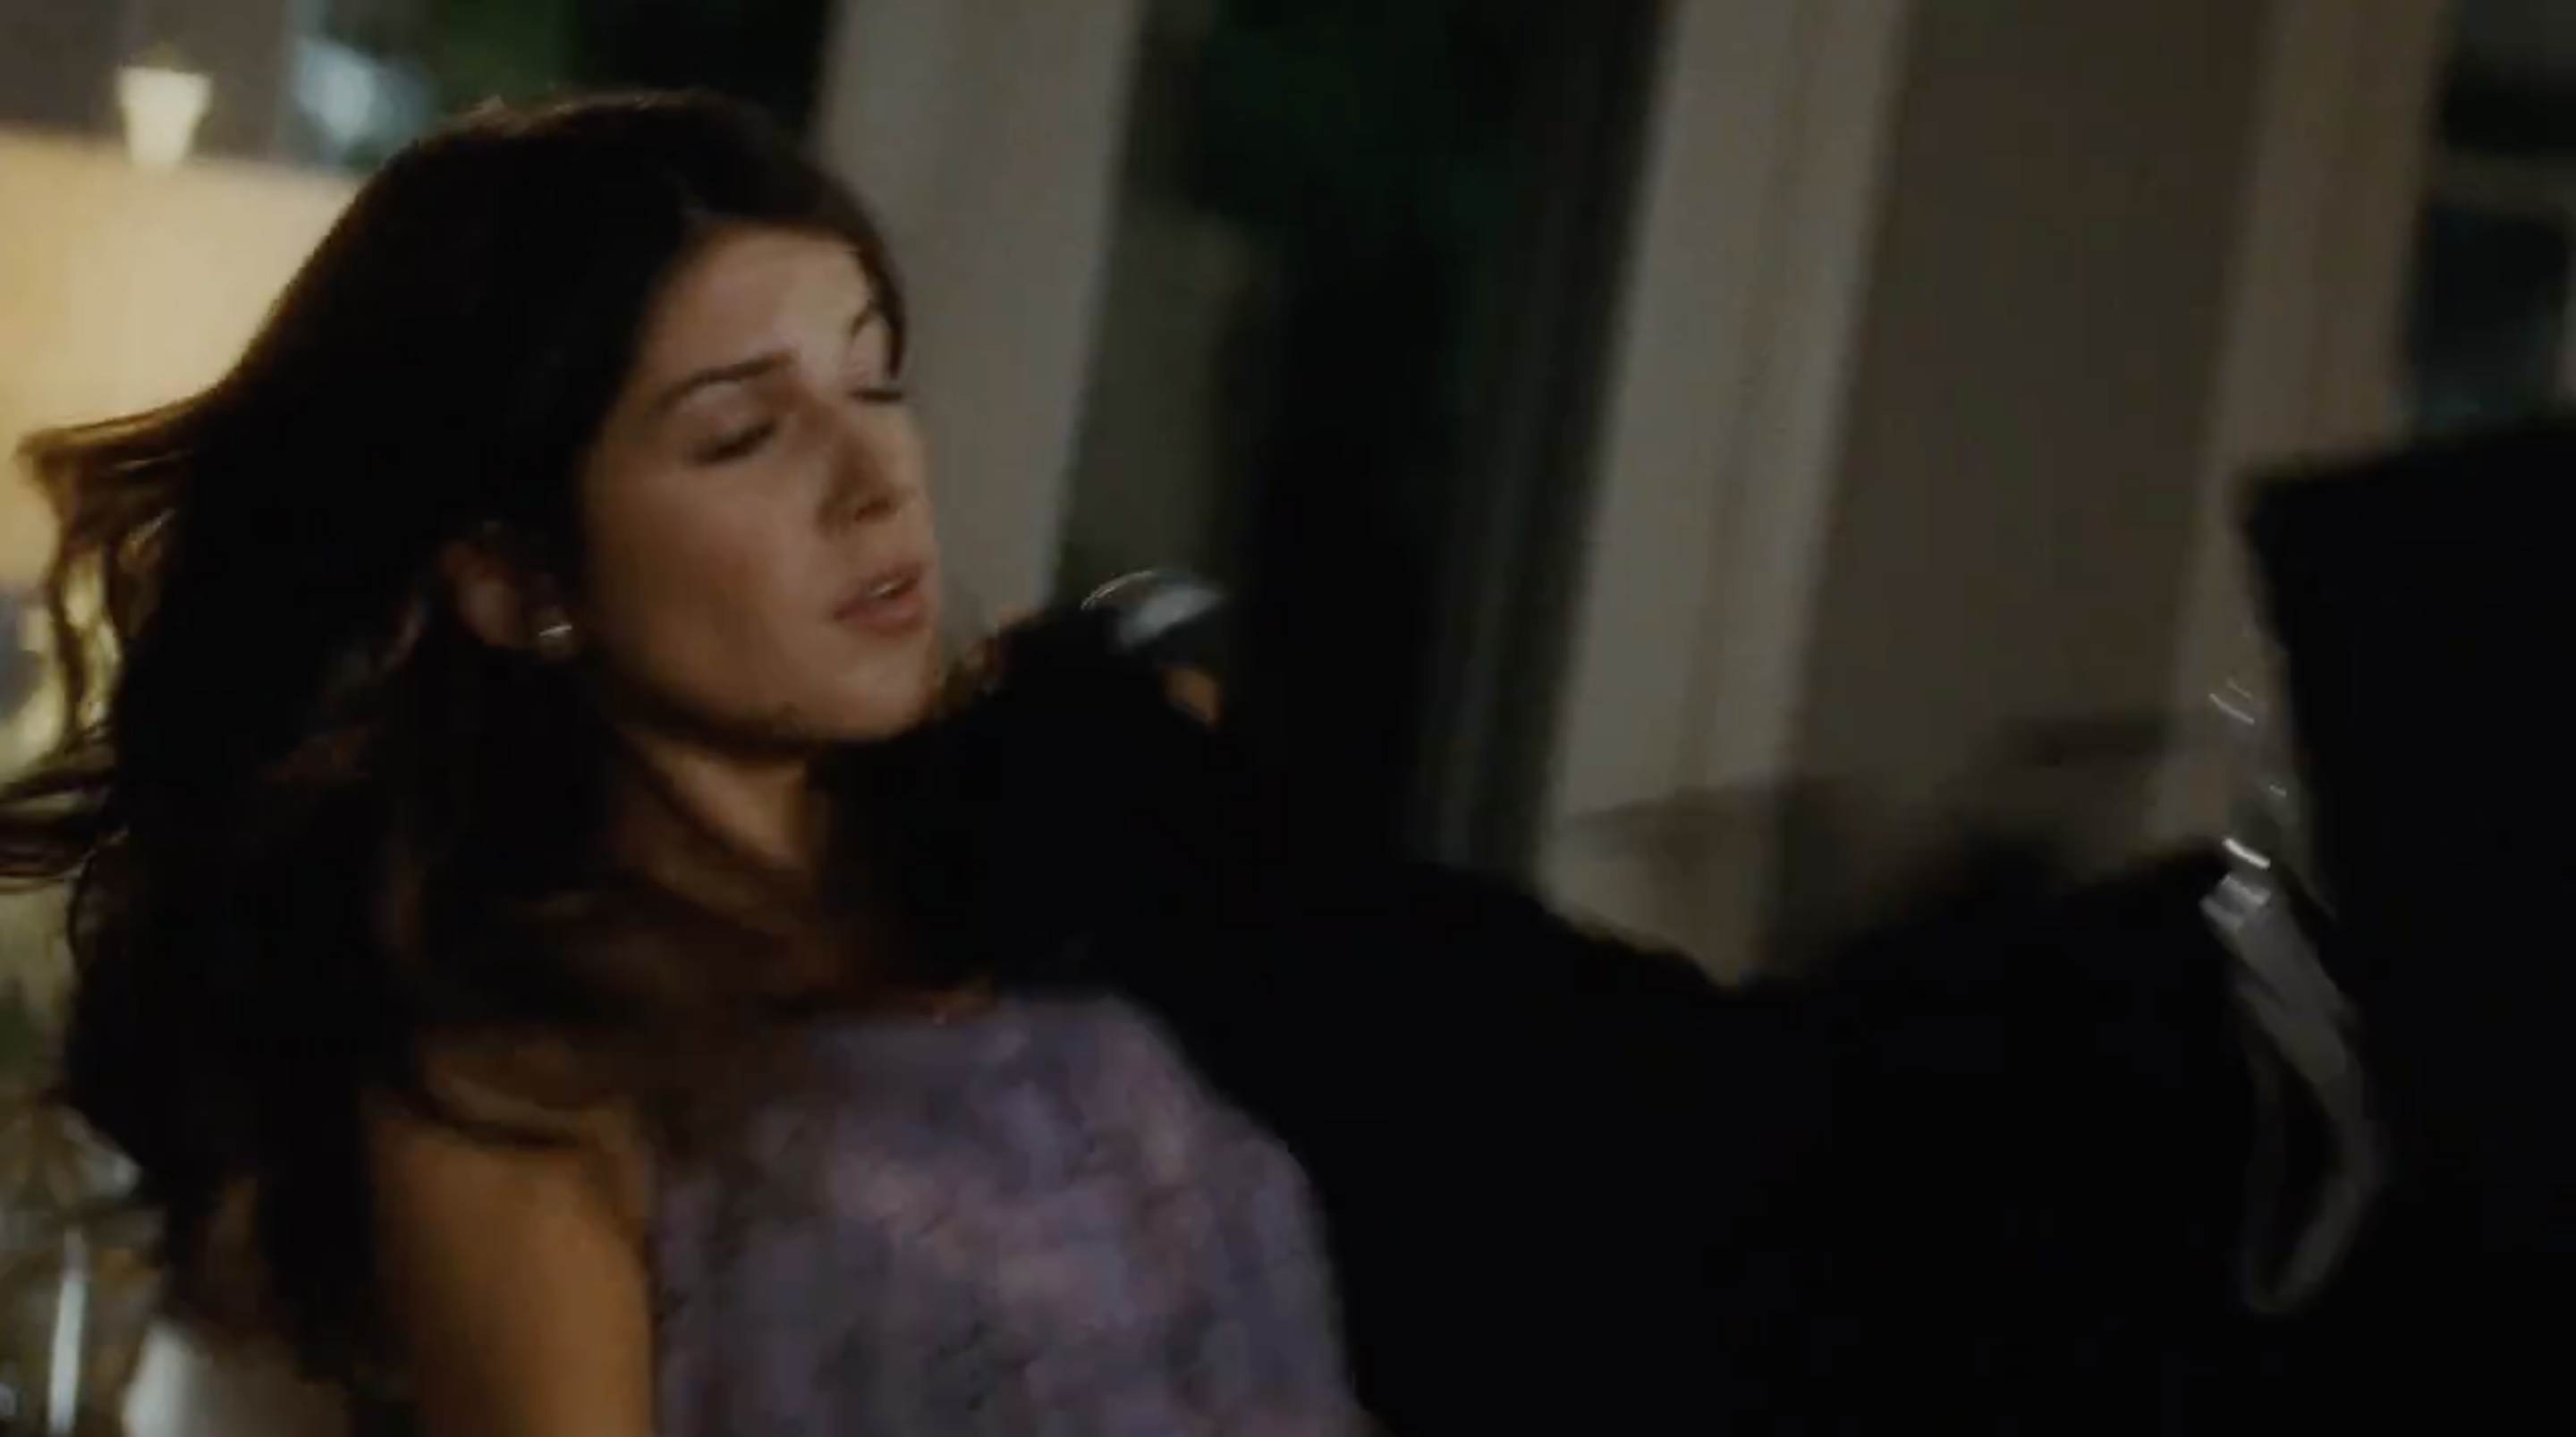 Shenae Grimes gets stabbed in the chest by Ghostface